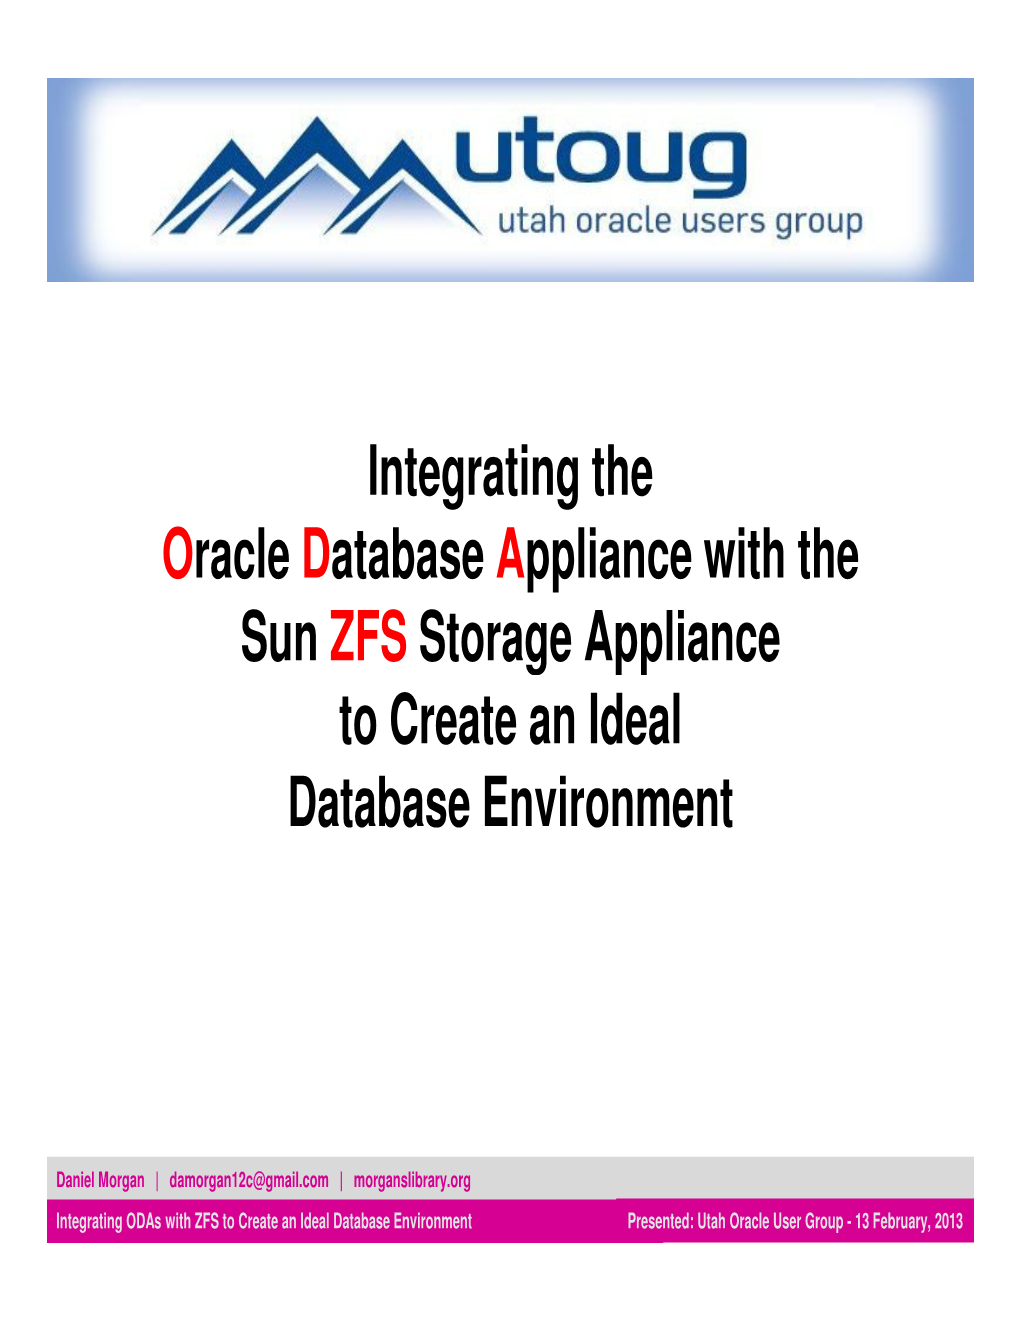 Integrating the Oracle Database Appliance with the Sun ZFS Storage Appliance to Create an Ideal Database Environment